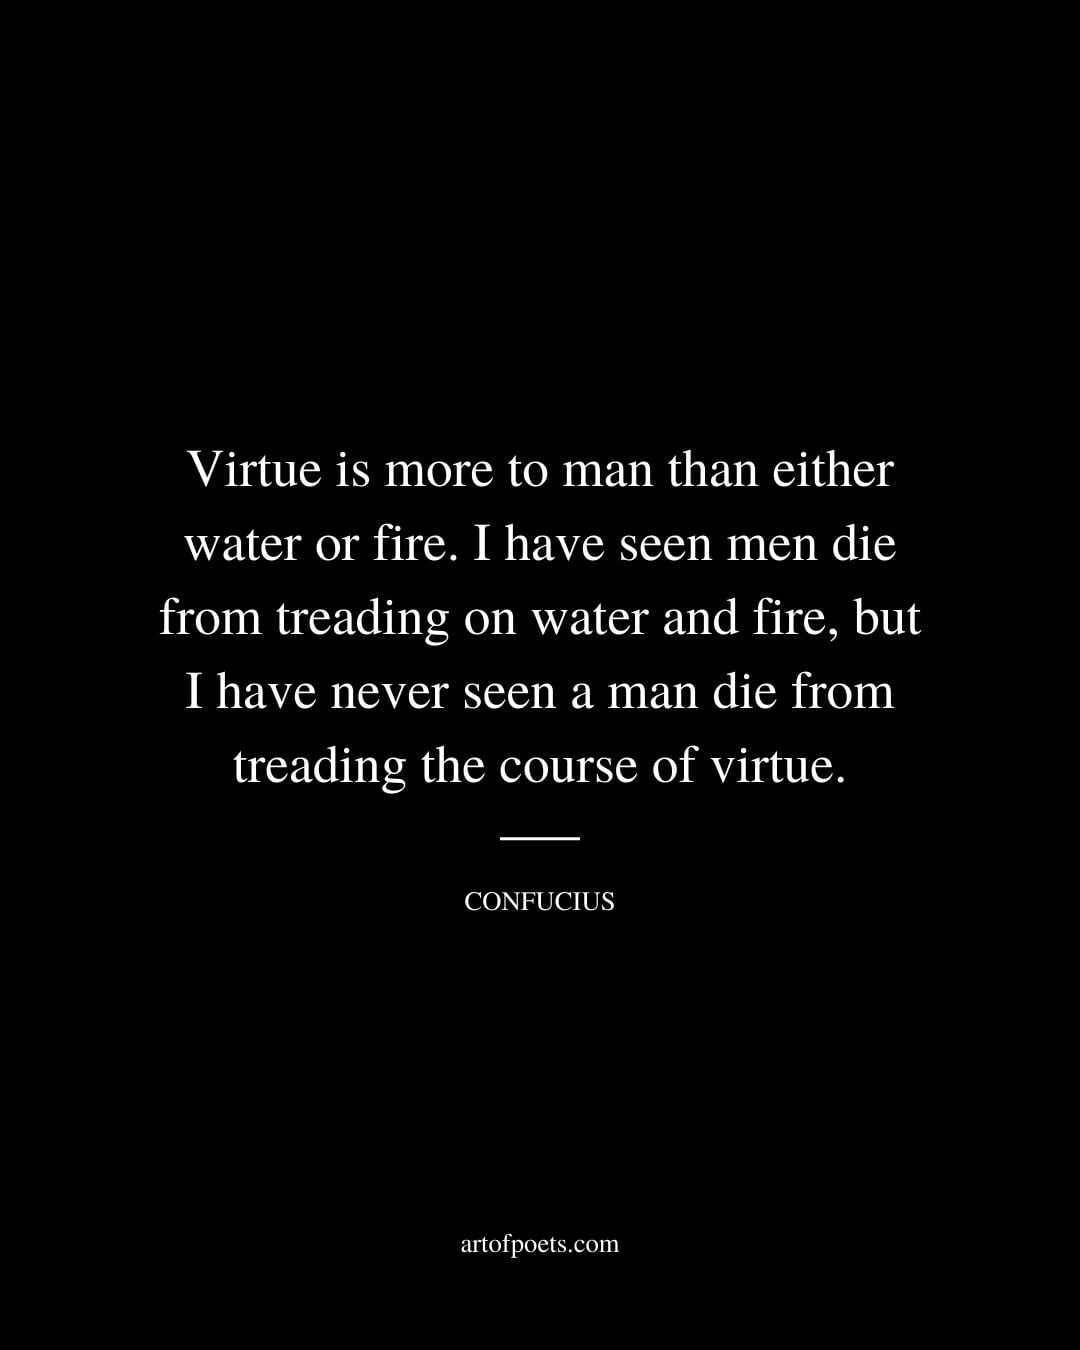 Virtue is more to man than either water or fire. I have seen men die from treading on water and fire